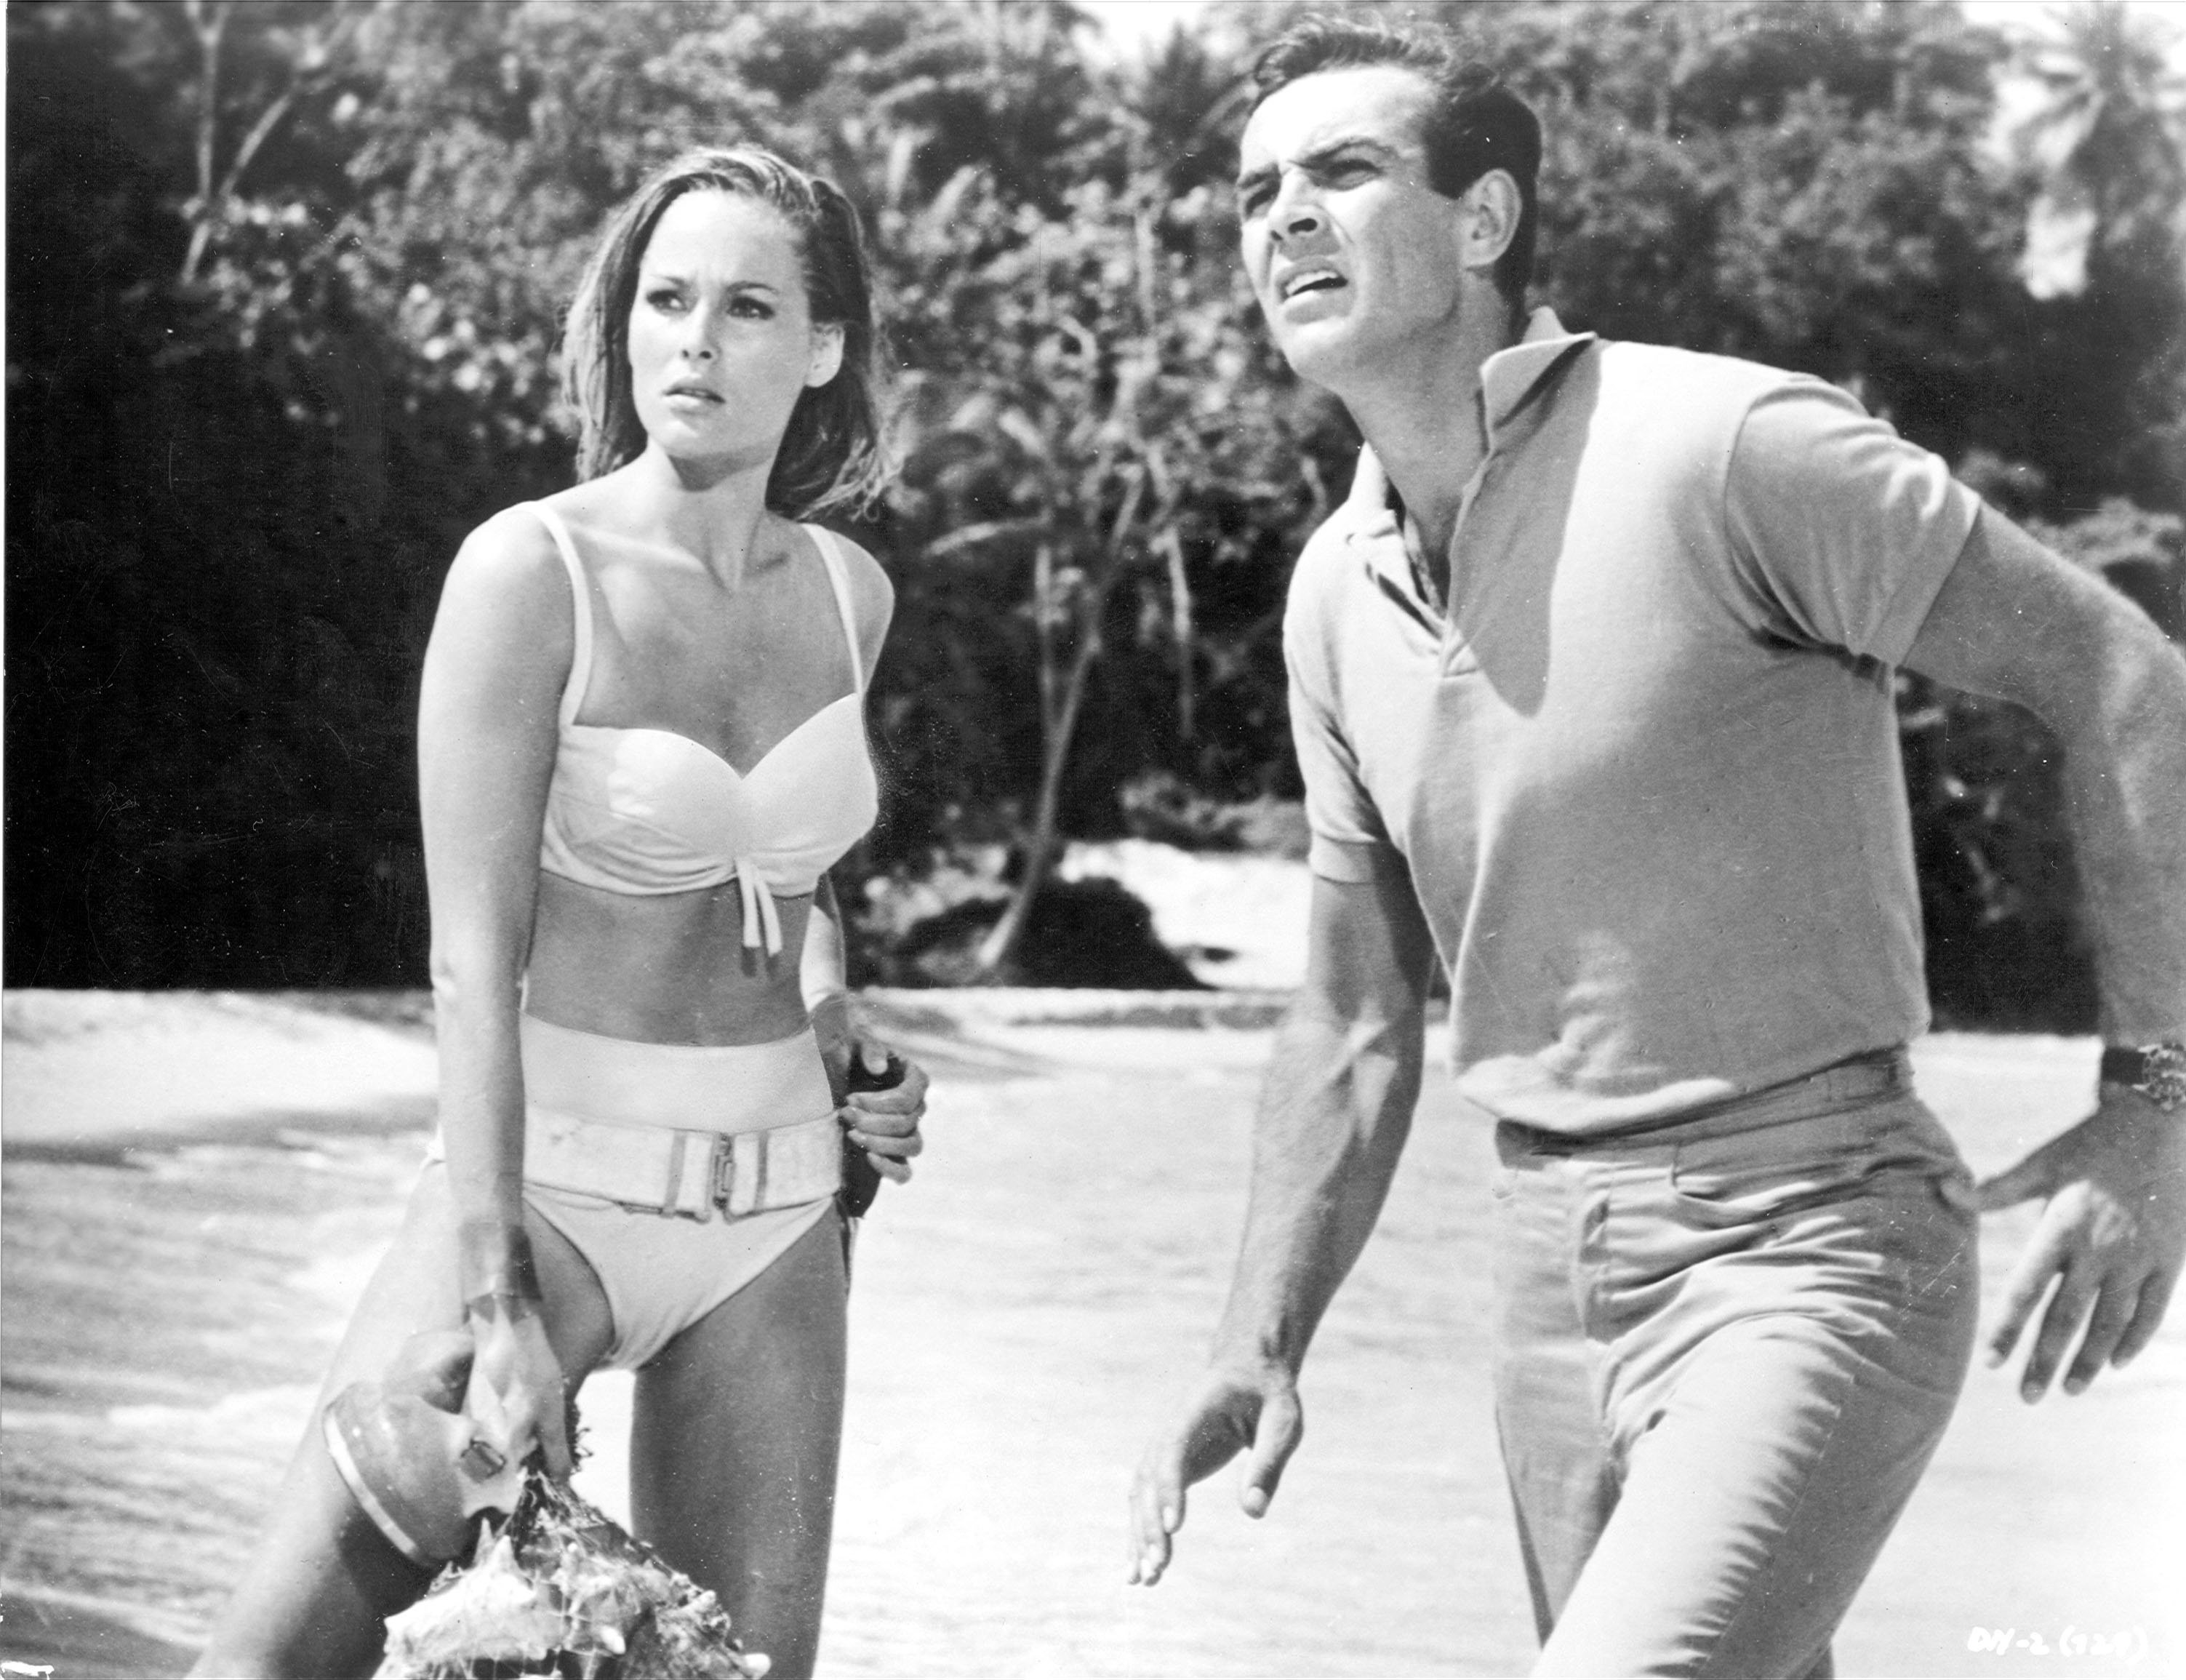 Ursula Andress and Sean Connery on a beach